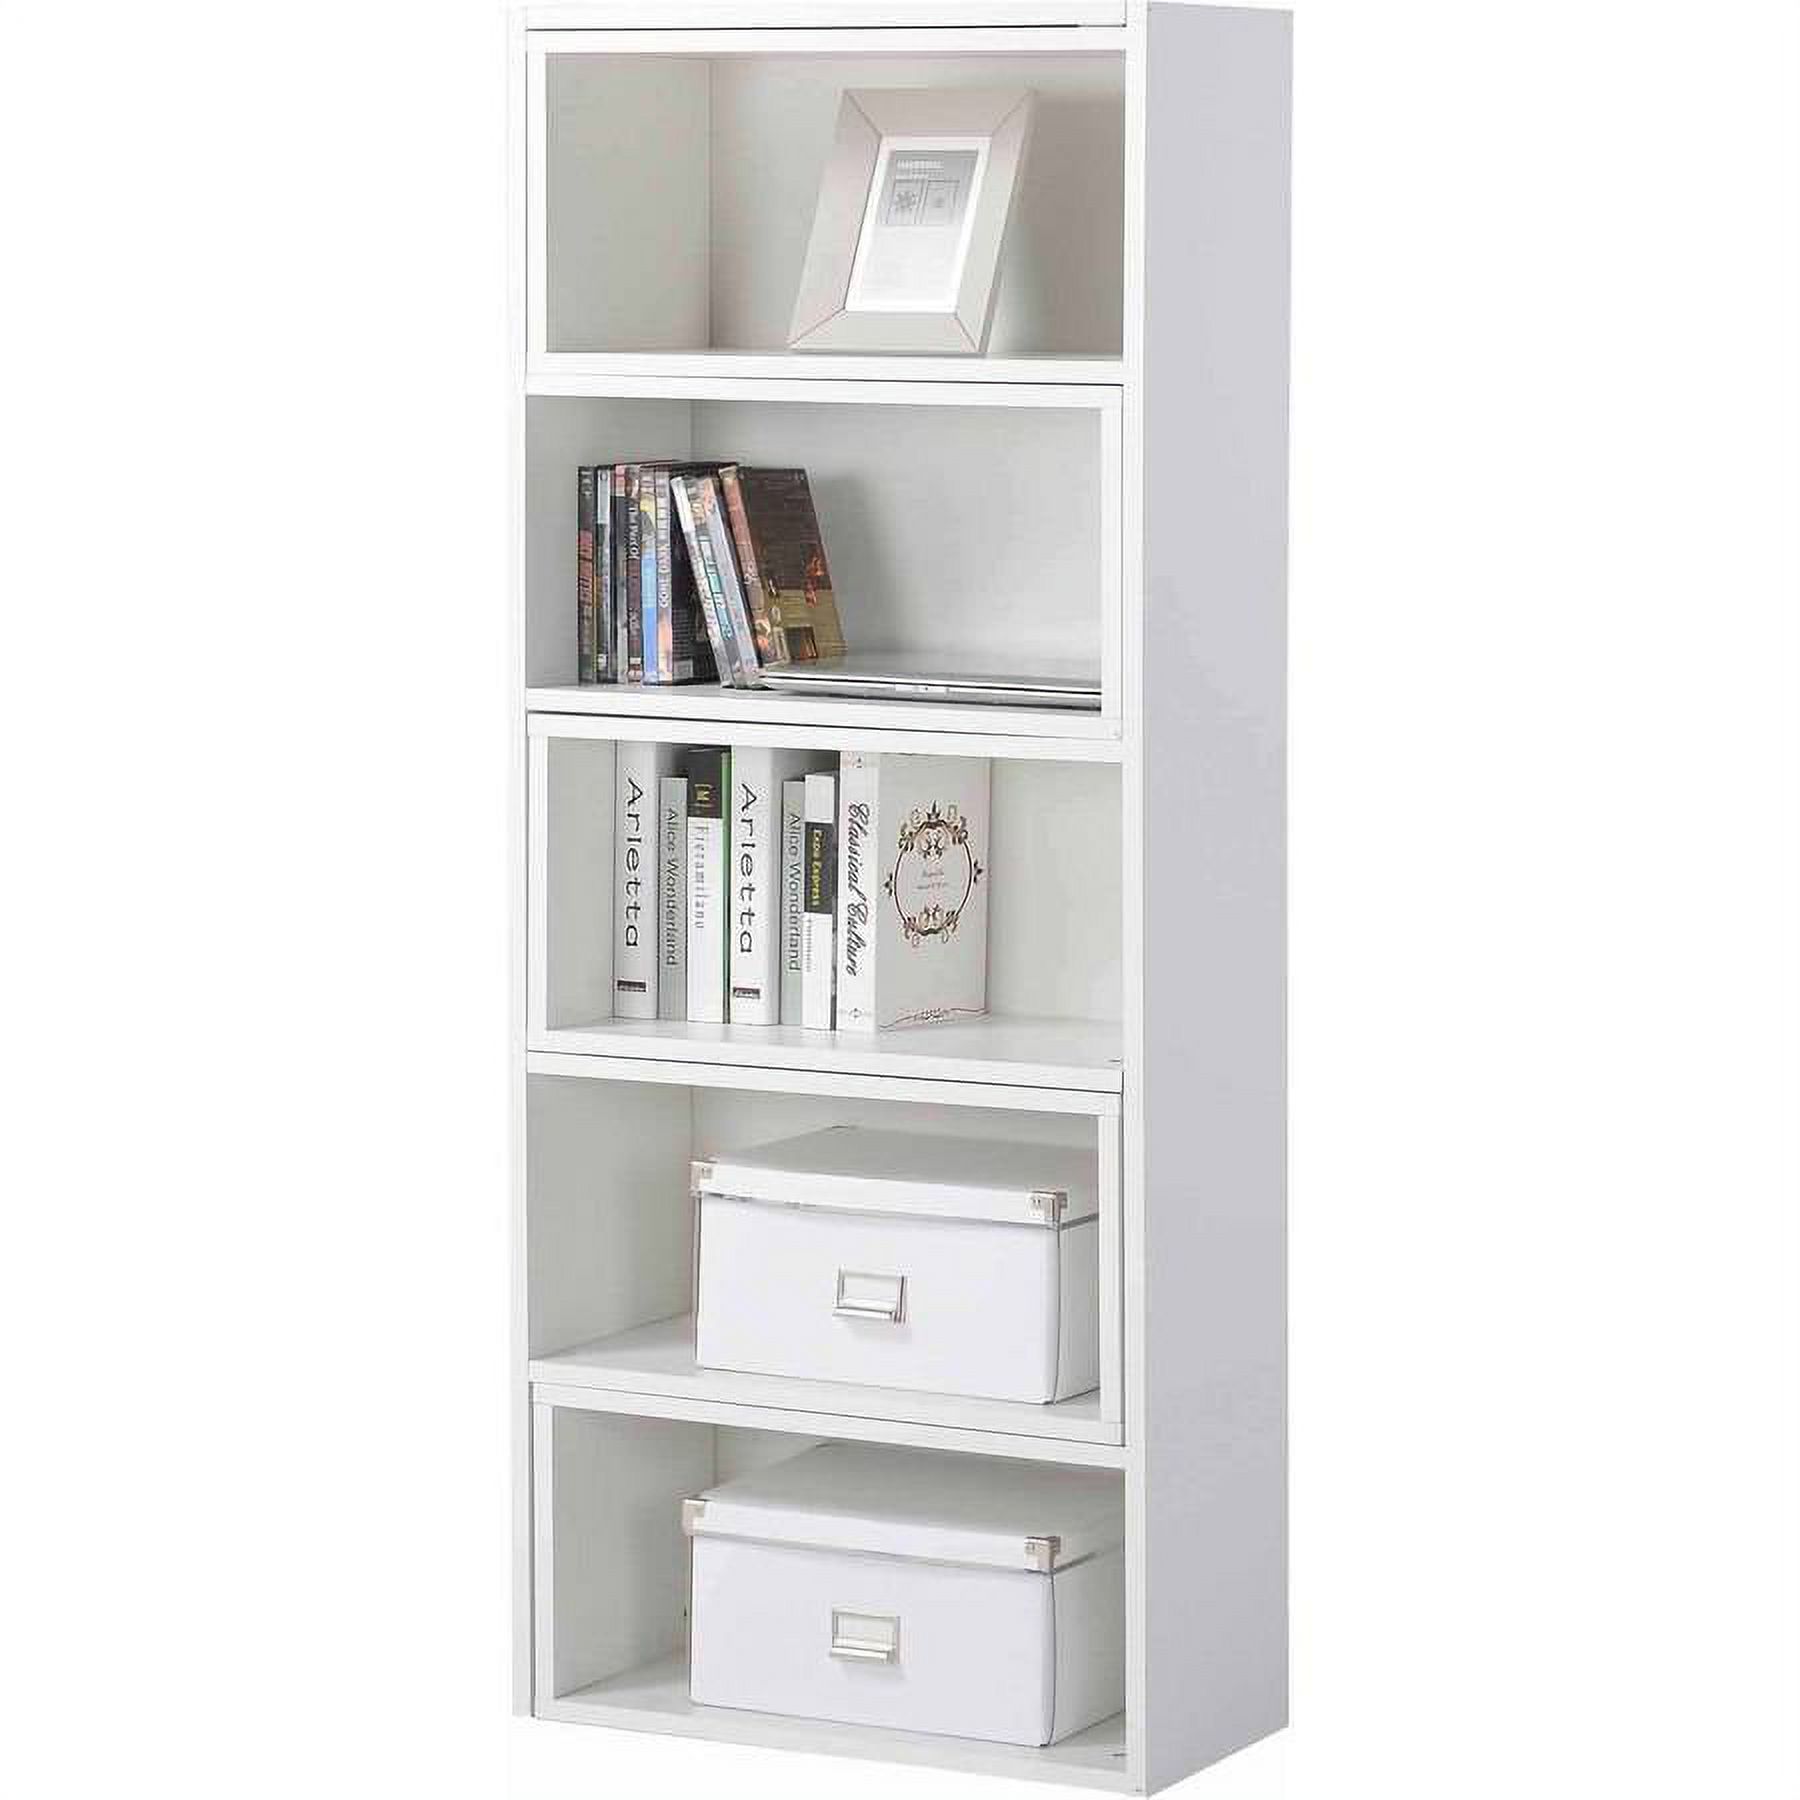 Homestar Flexible and Expandable Shelving Console, White - image 3 of 6